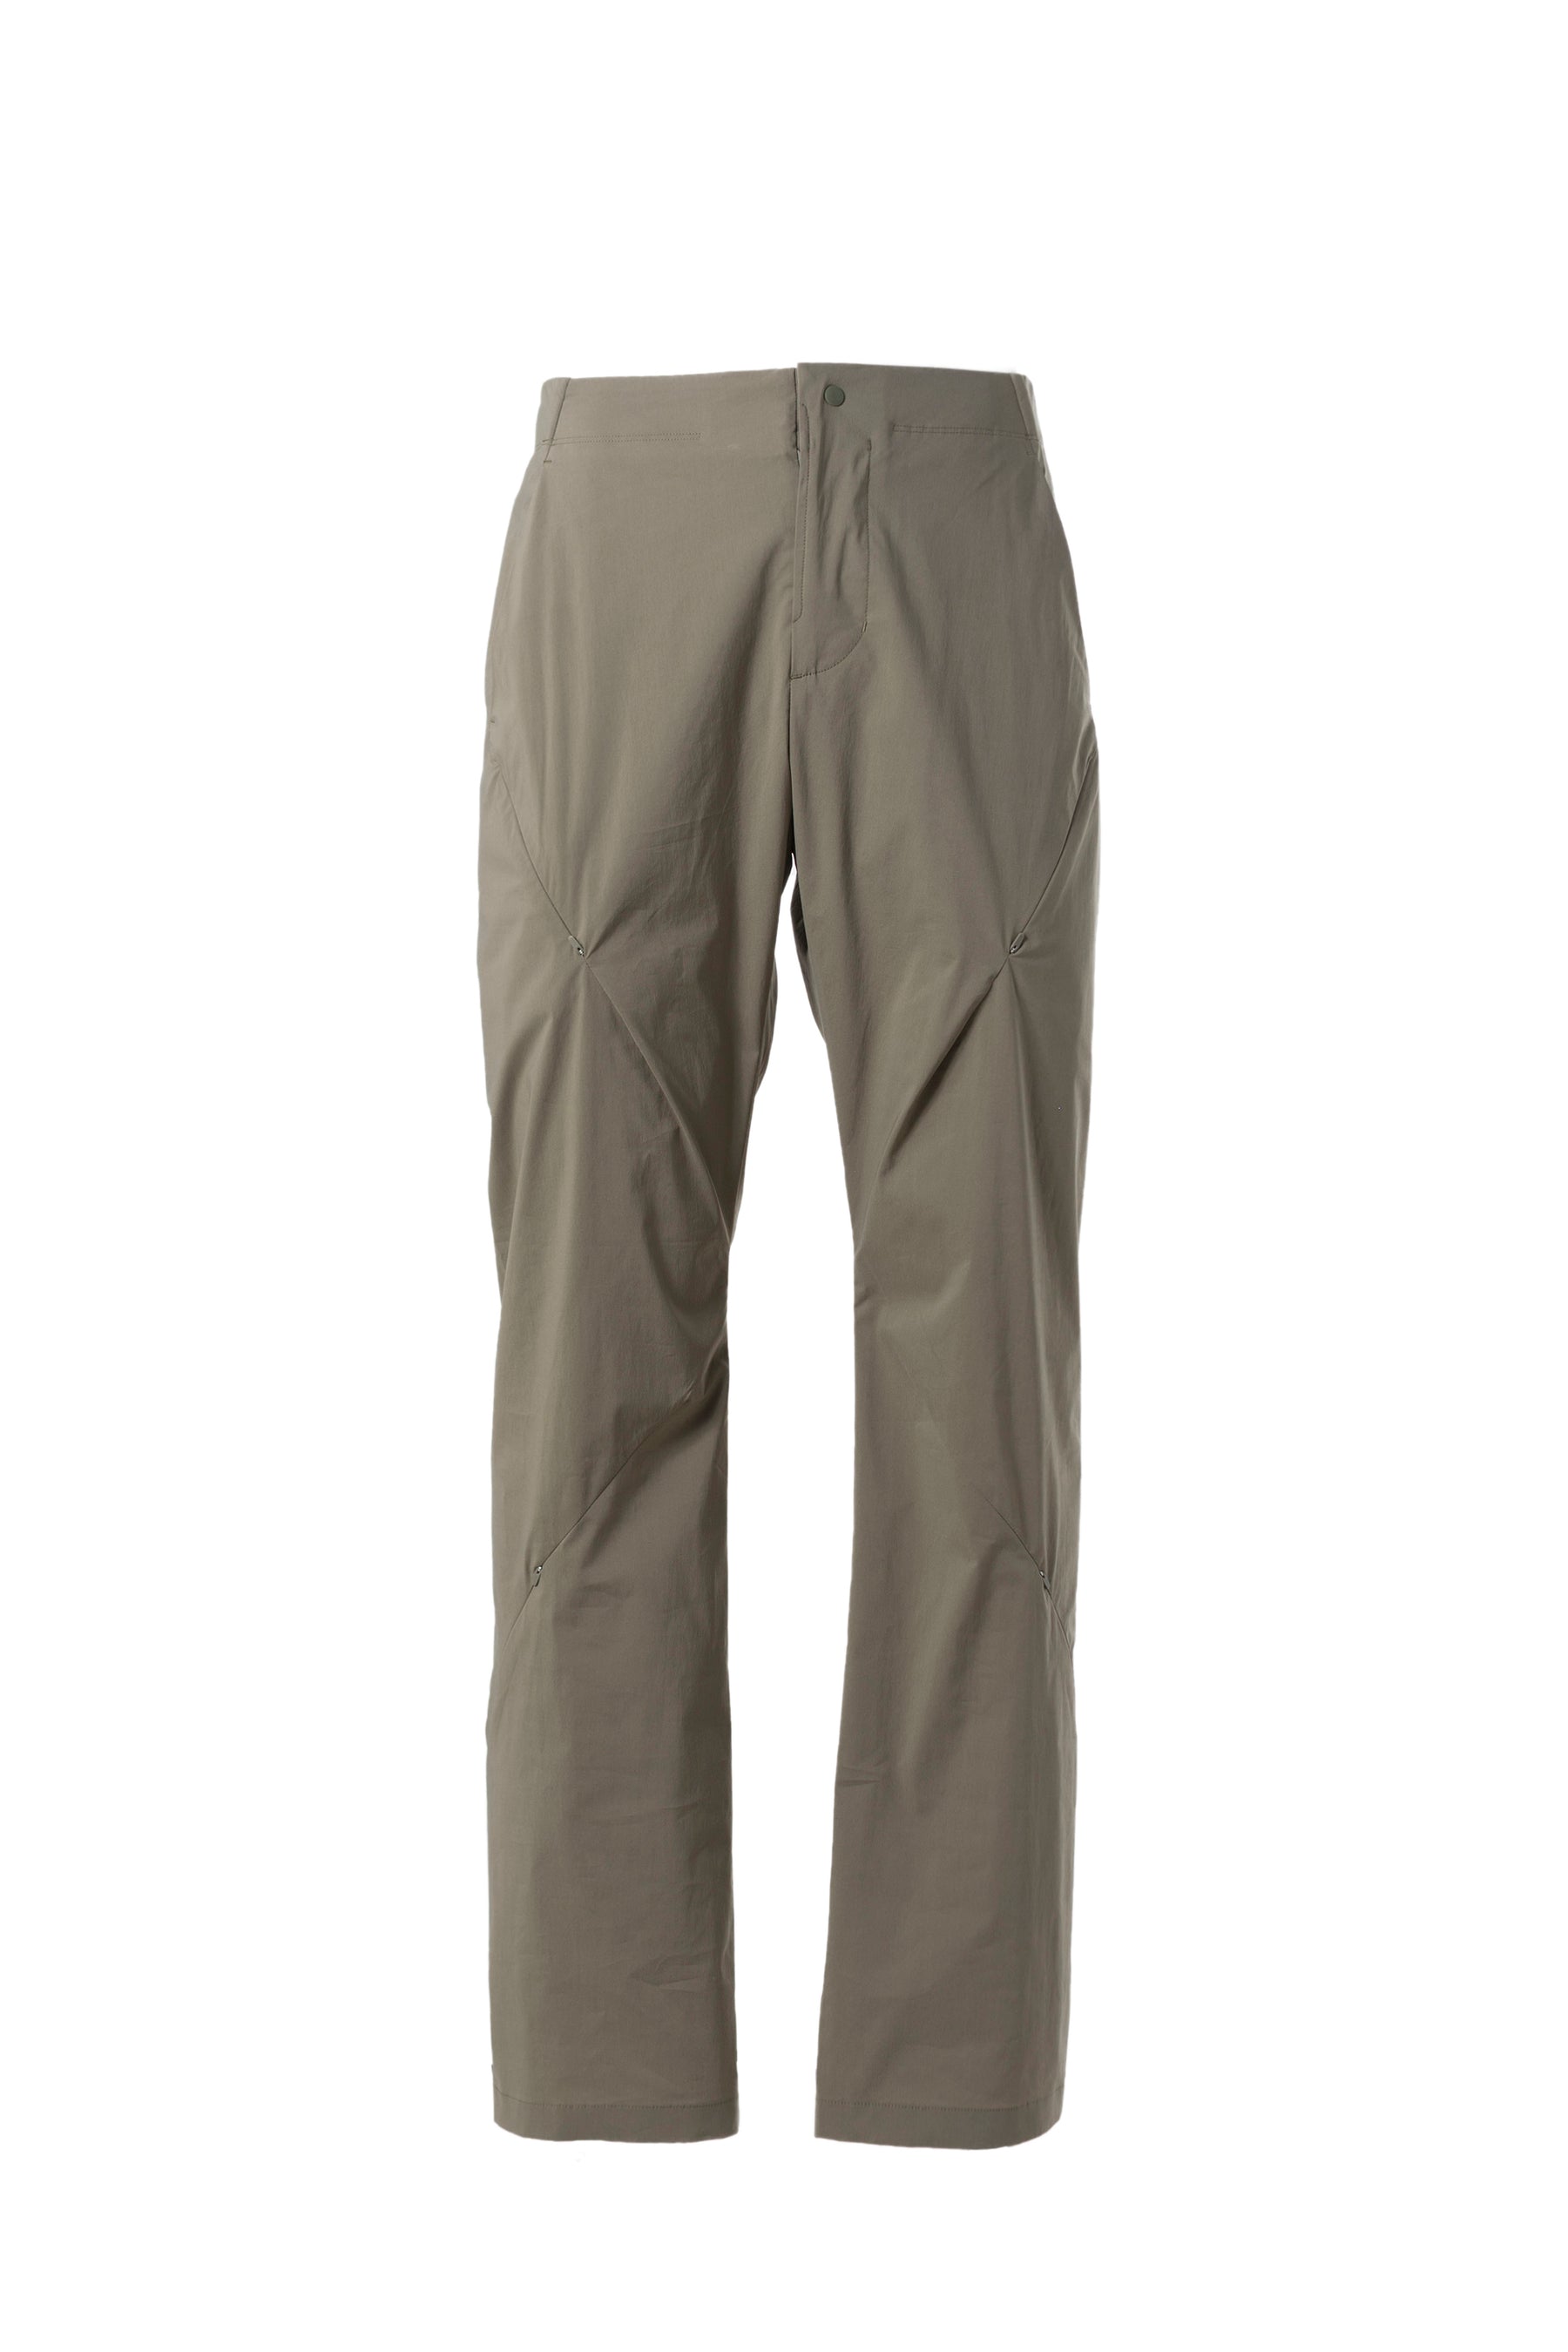 5.0+ TECHNICAL PANTS RIGHT / OLV GRN